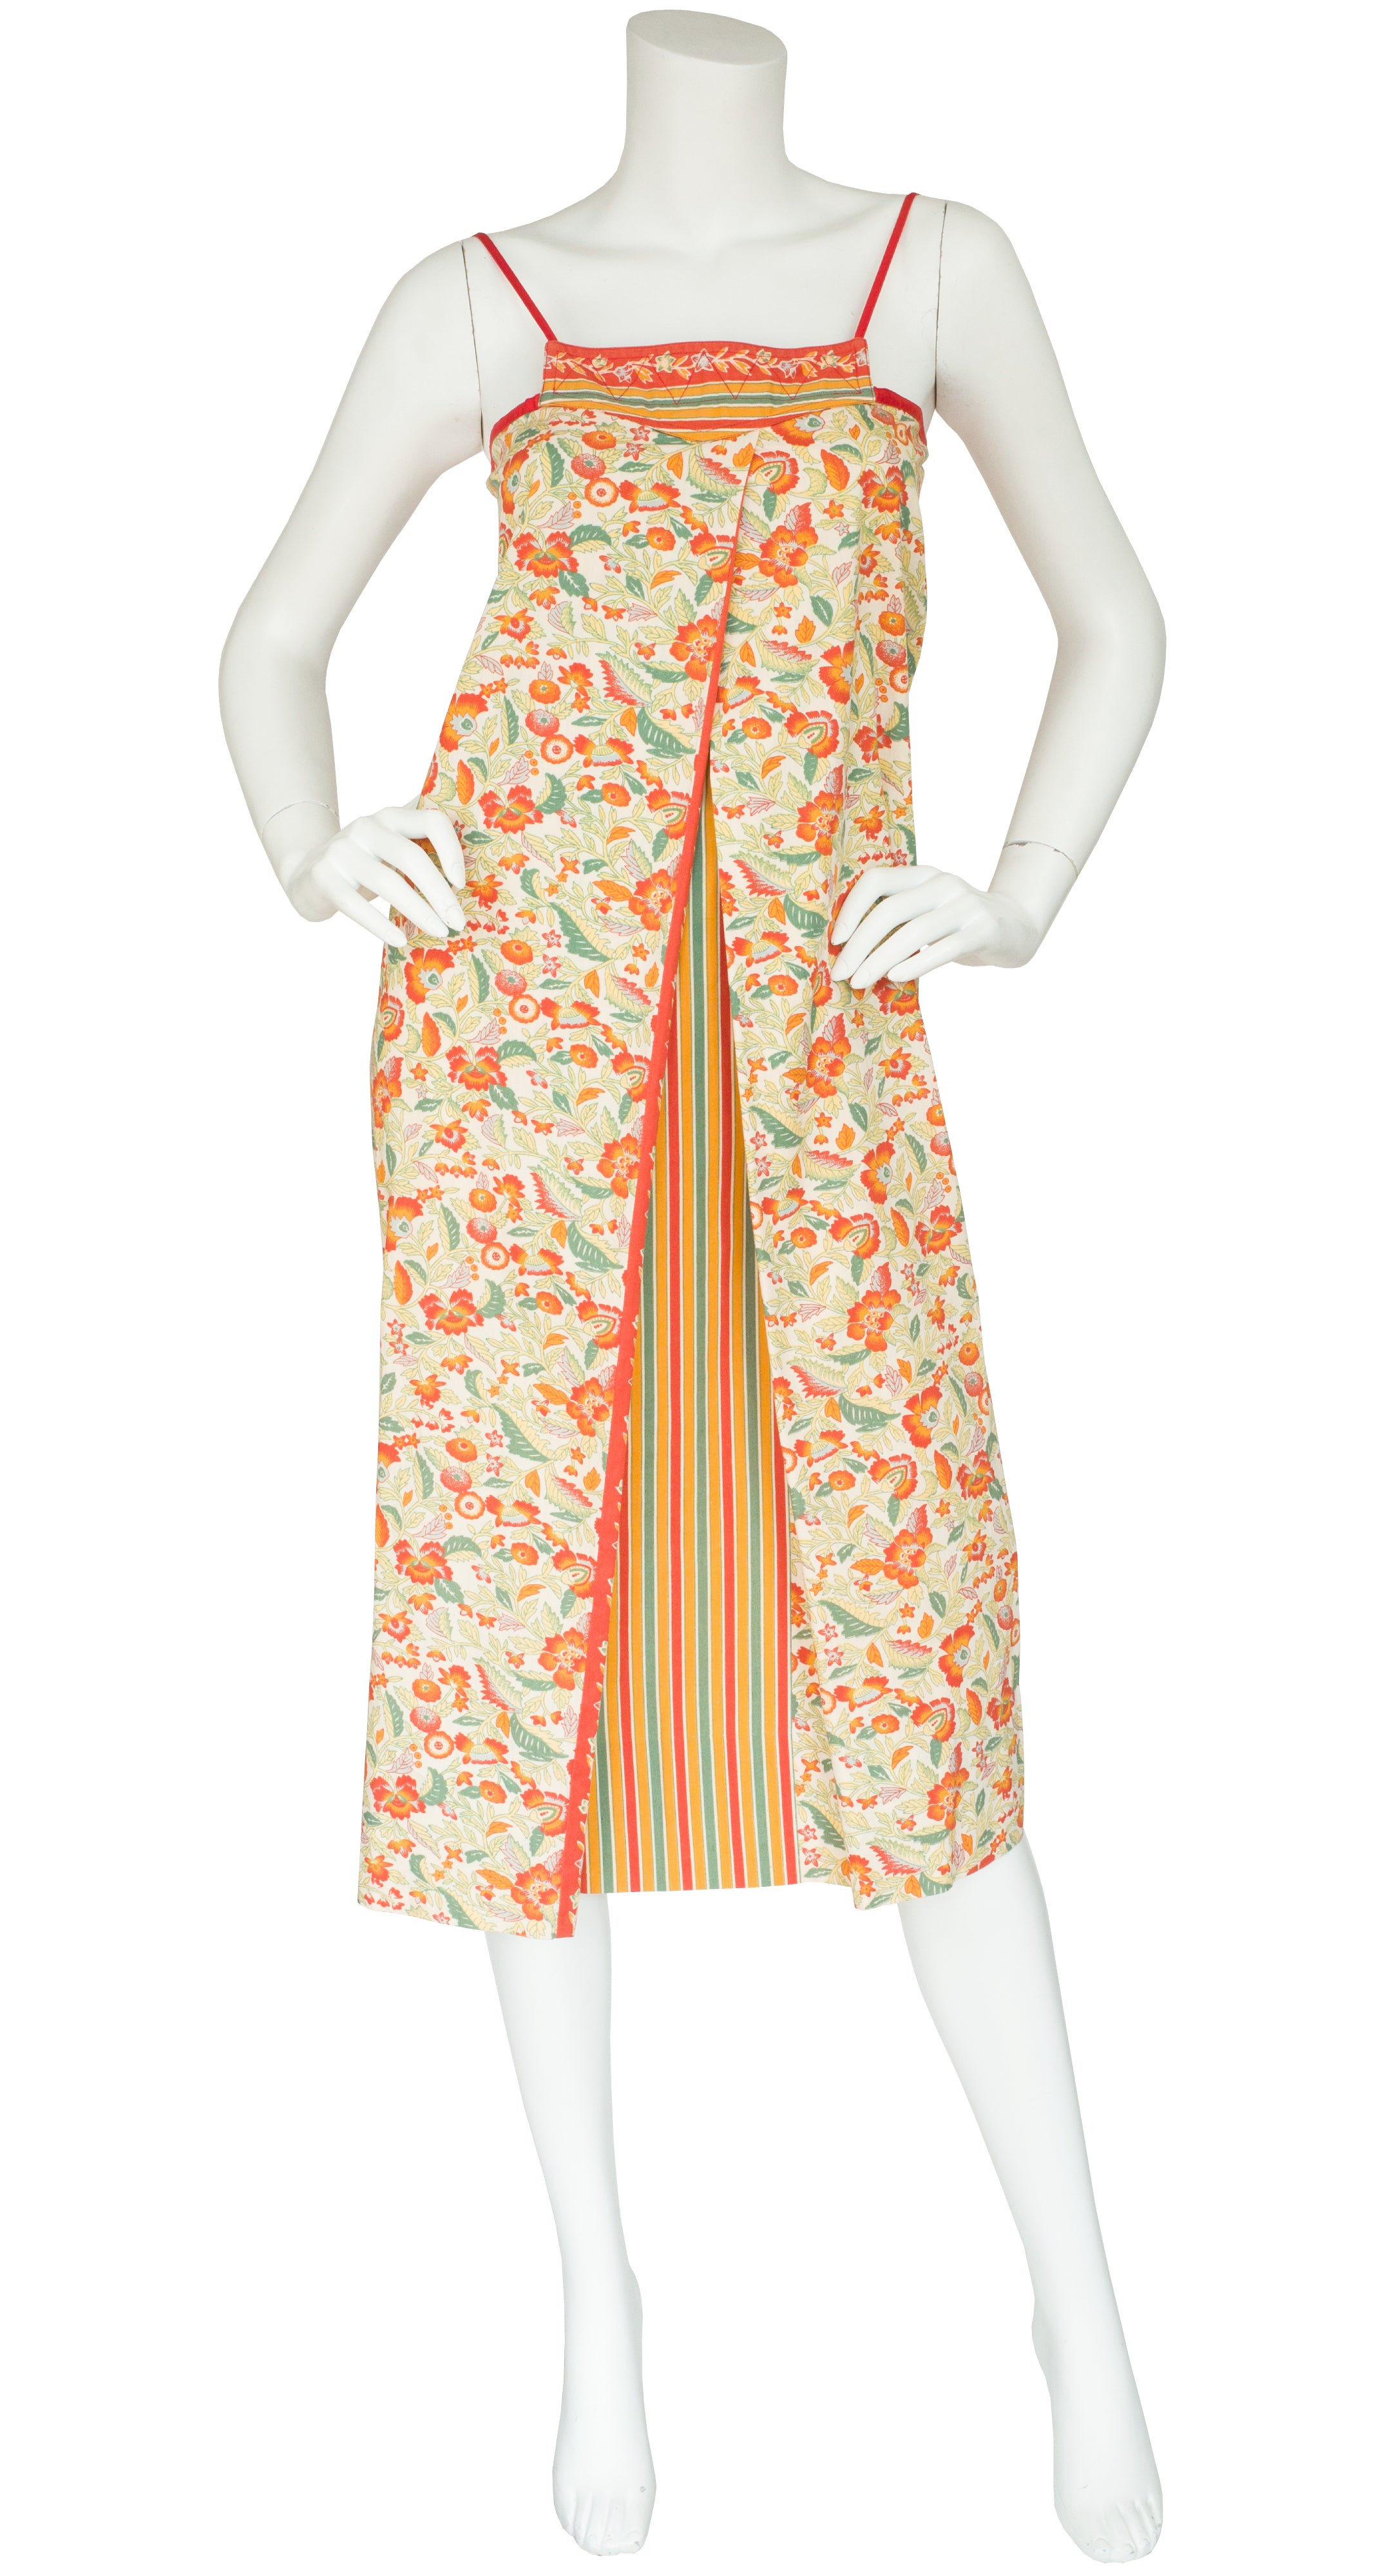 1976 S/S Documented Floral Cotton Summer Dress